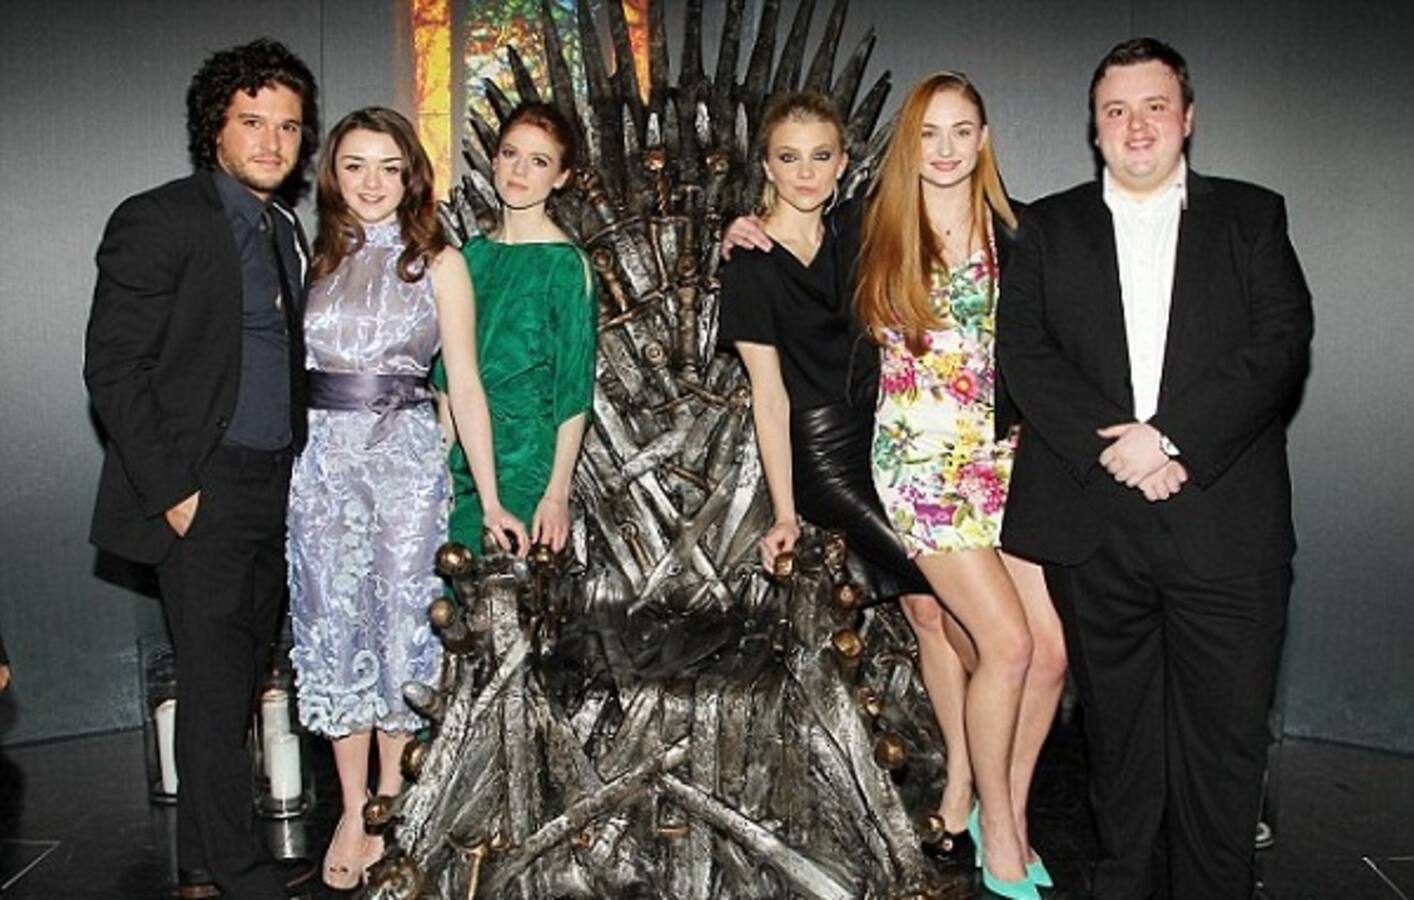 Daenerys, Sansa, Cersei, Jon from Game Of Thrones are just as CRAZY off the sets! Here's proof!